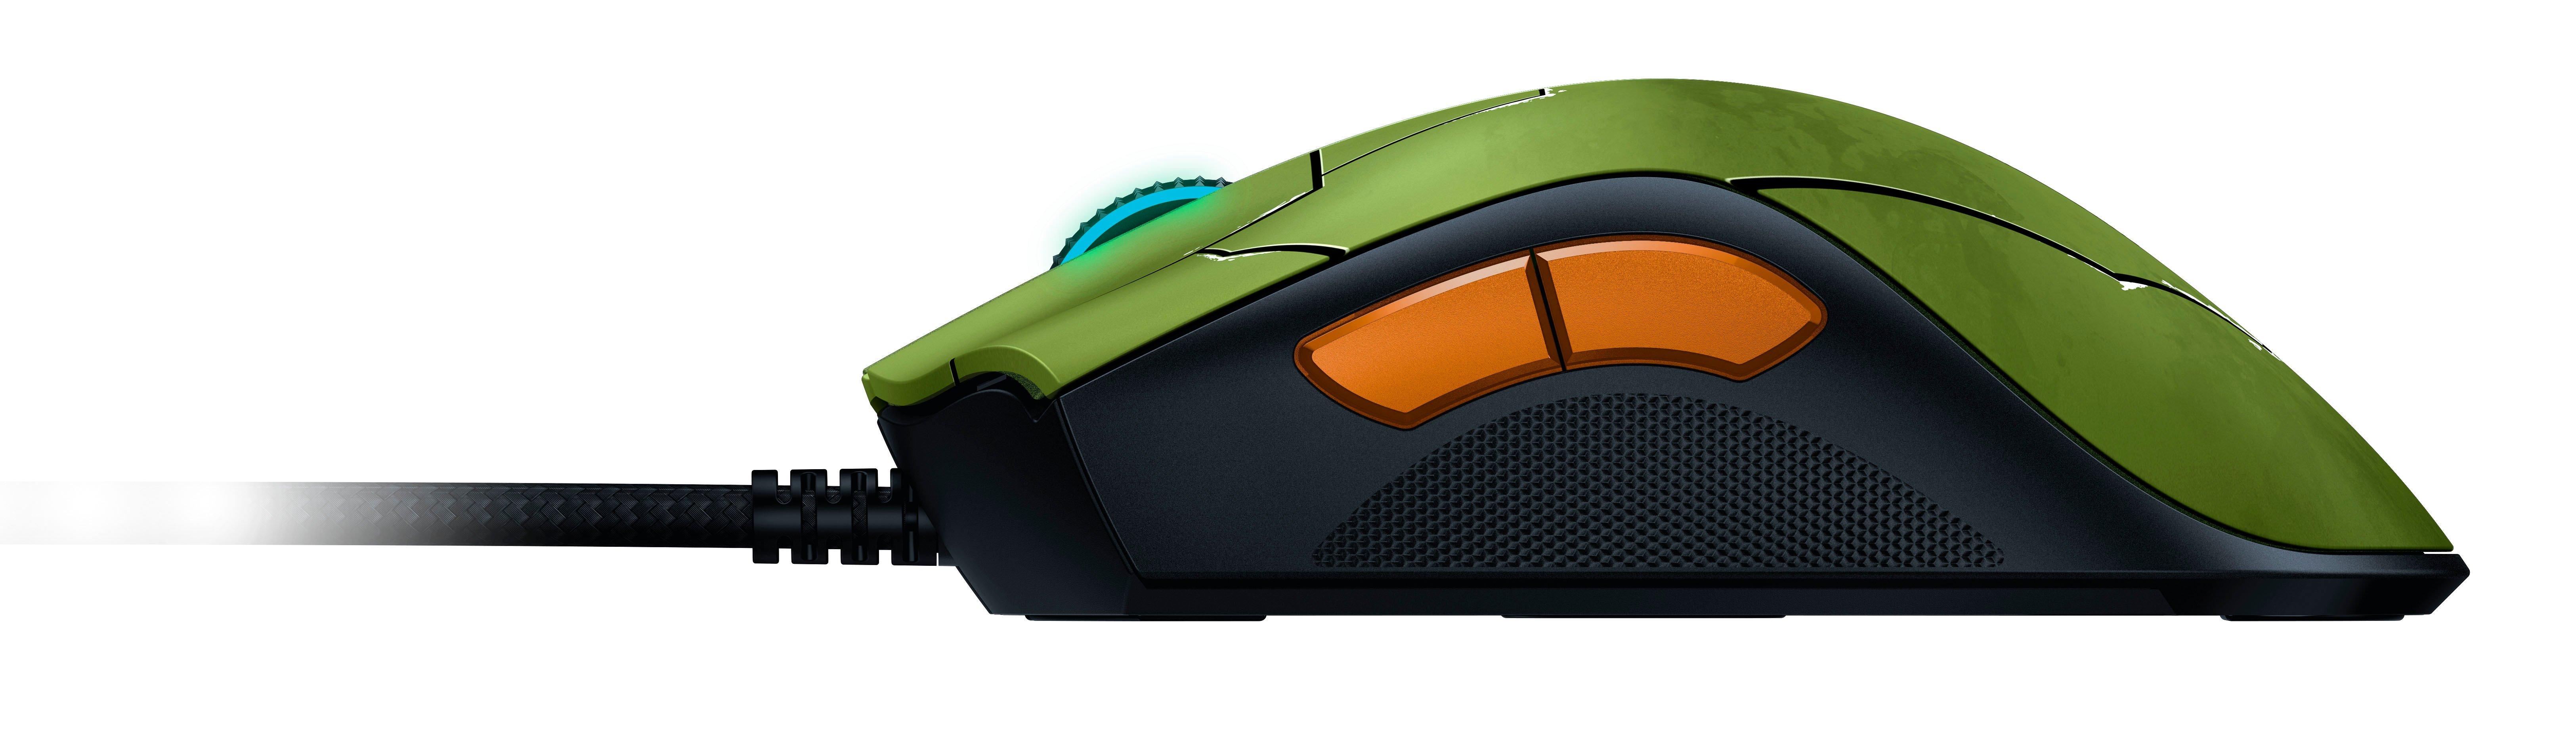 Razer DeathAdder V2 Wired Gaming Mouse - HALO Infinite Edition